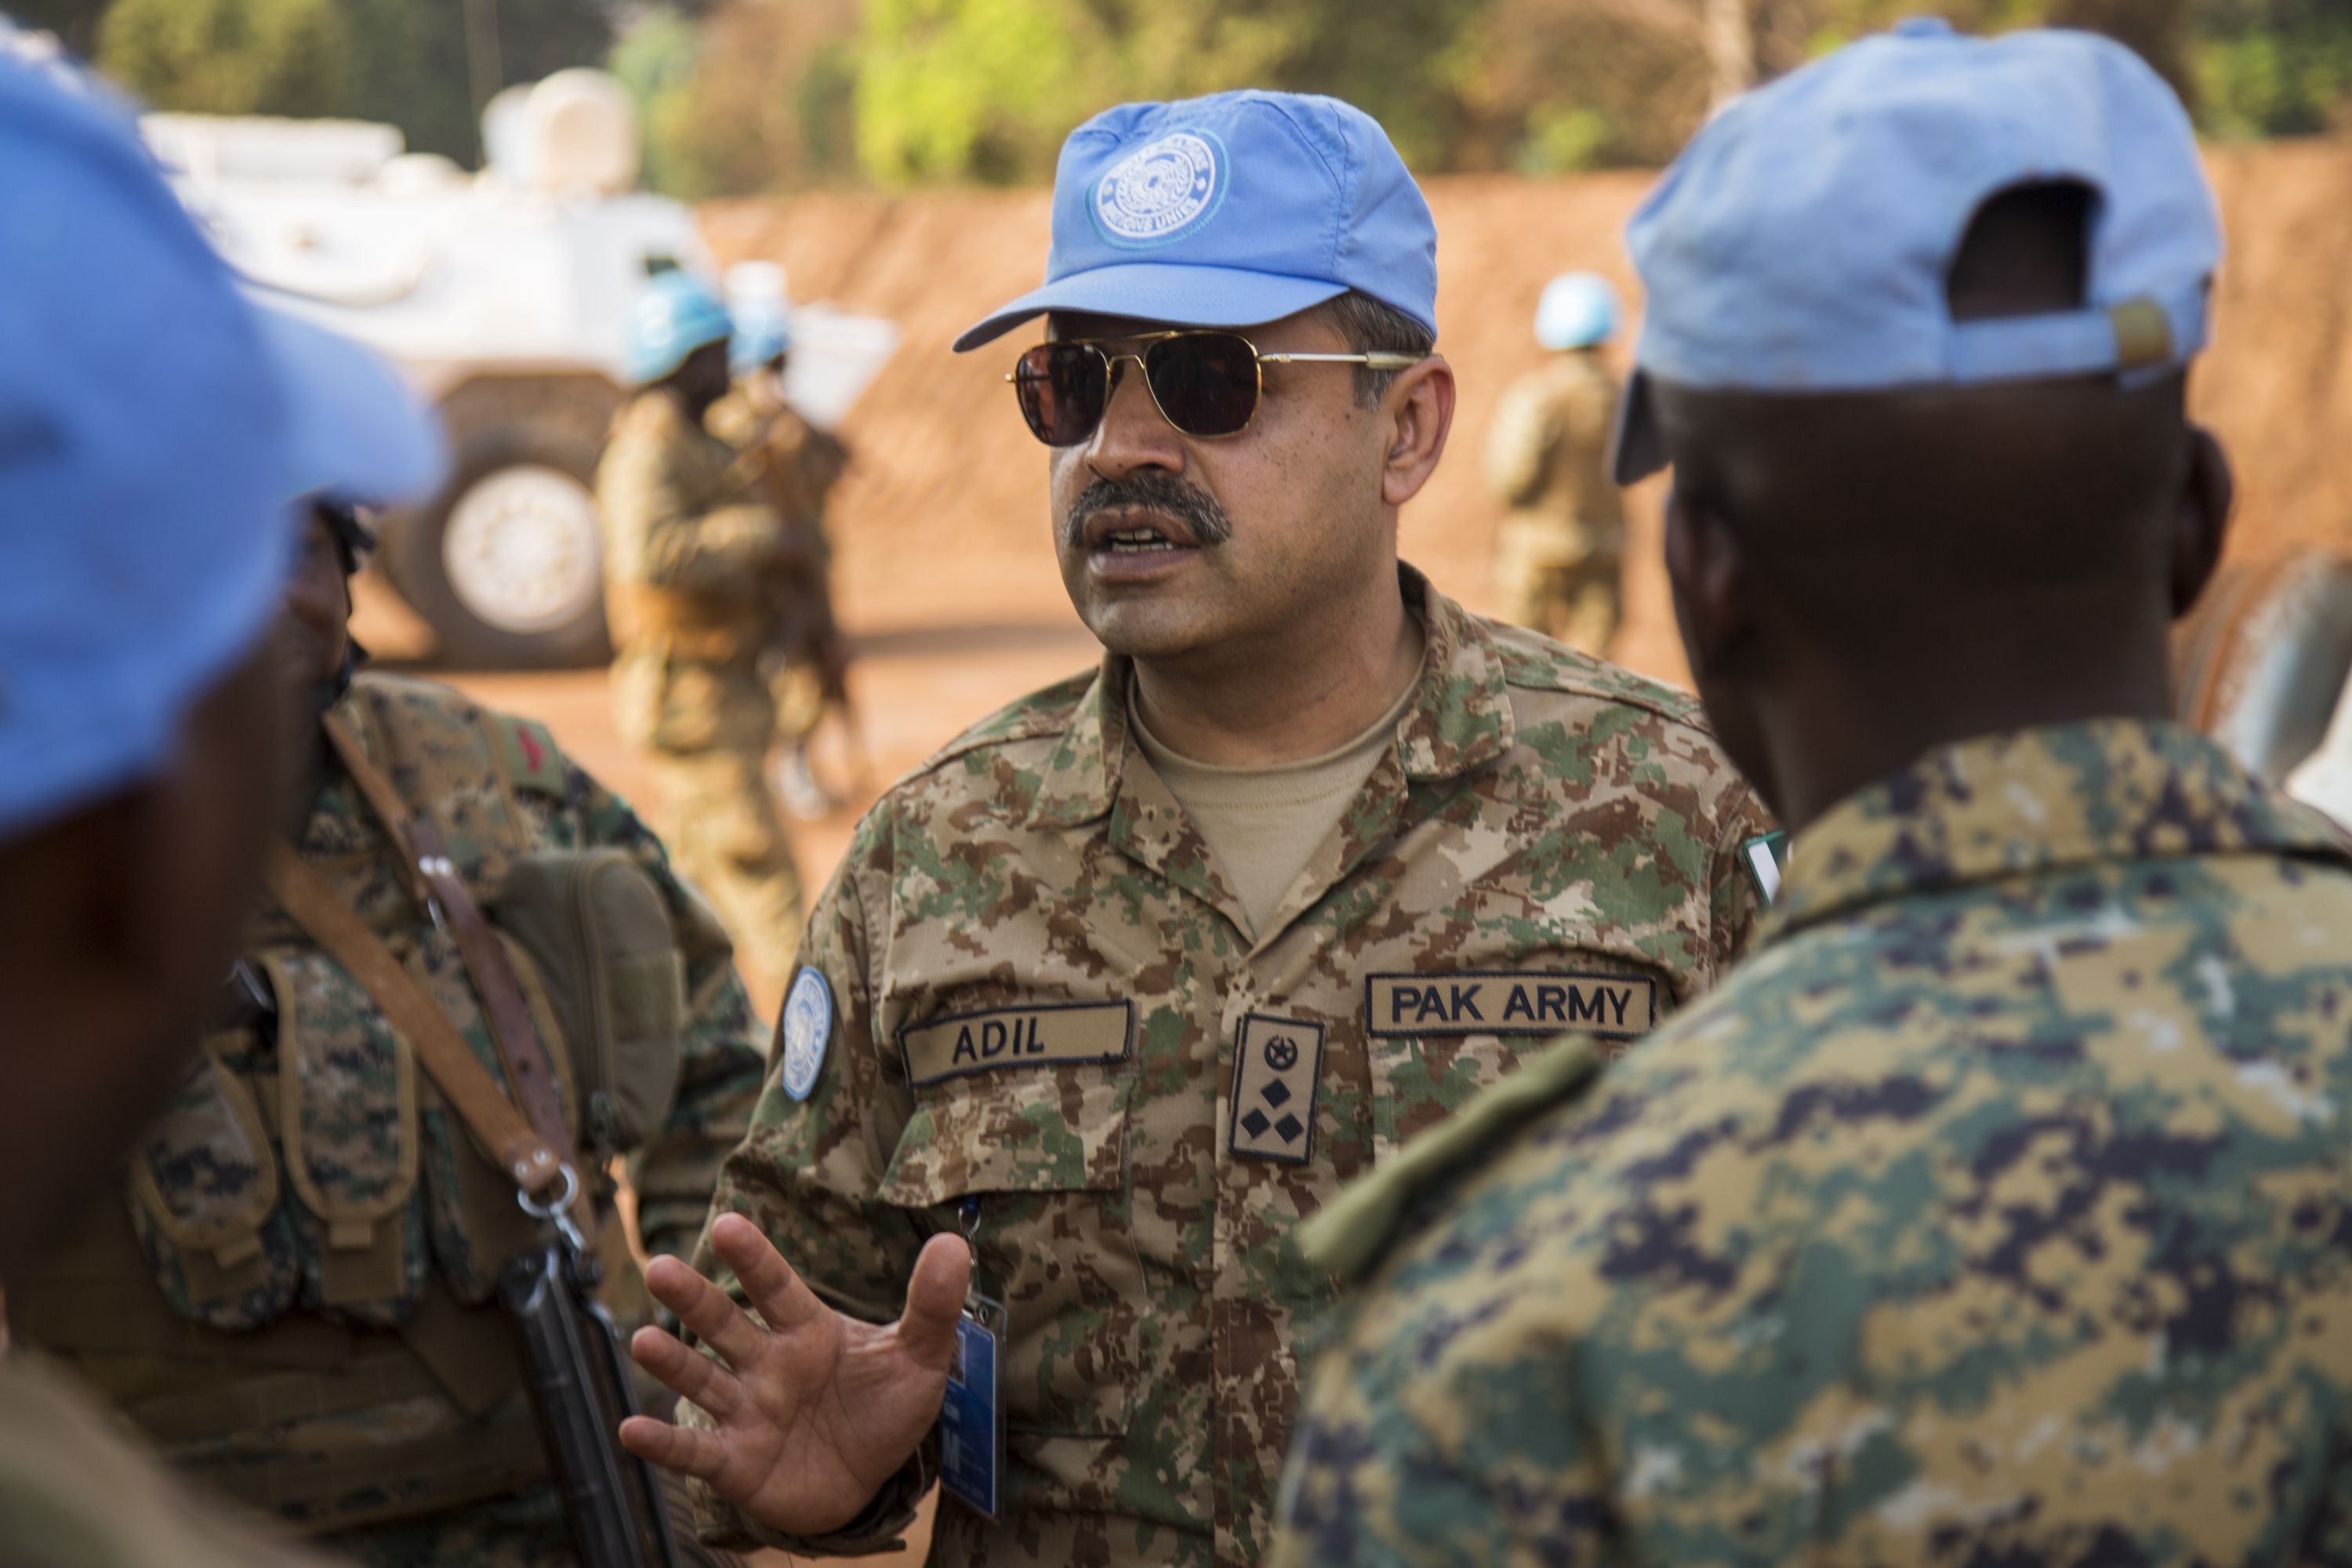 Brigadier-General Yamin Adil of the Pakistan Army heads up the peacekeeping force around Bria. Image by Jack Losh. Central African Republic, 2018.